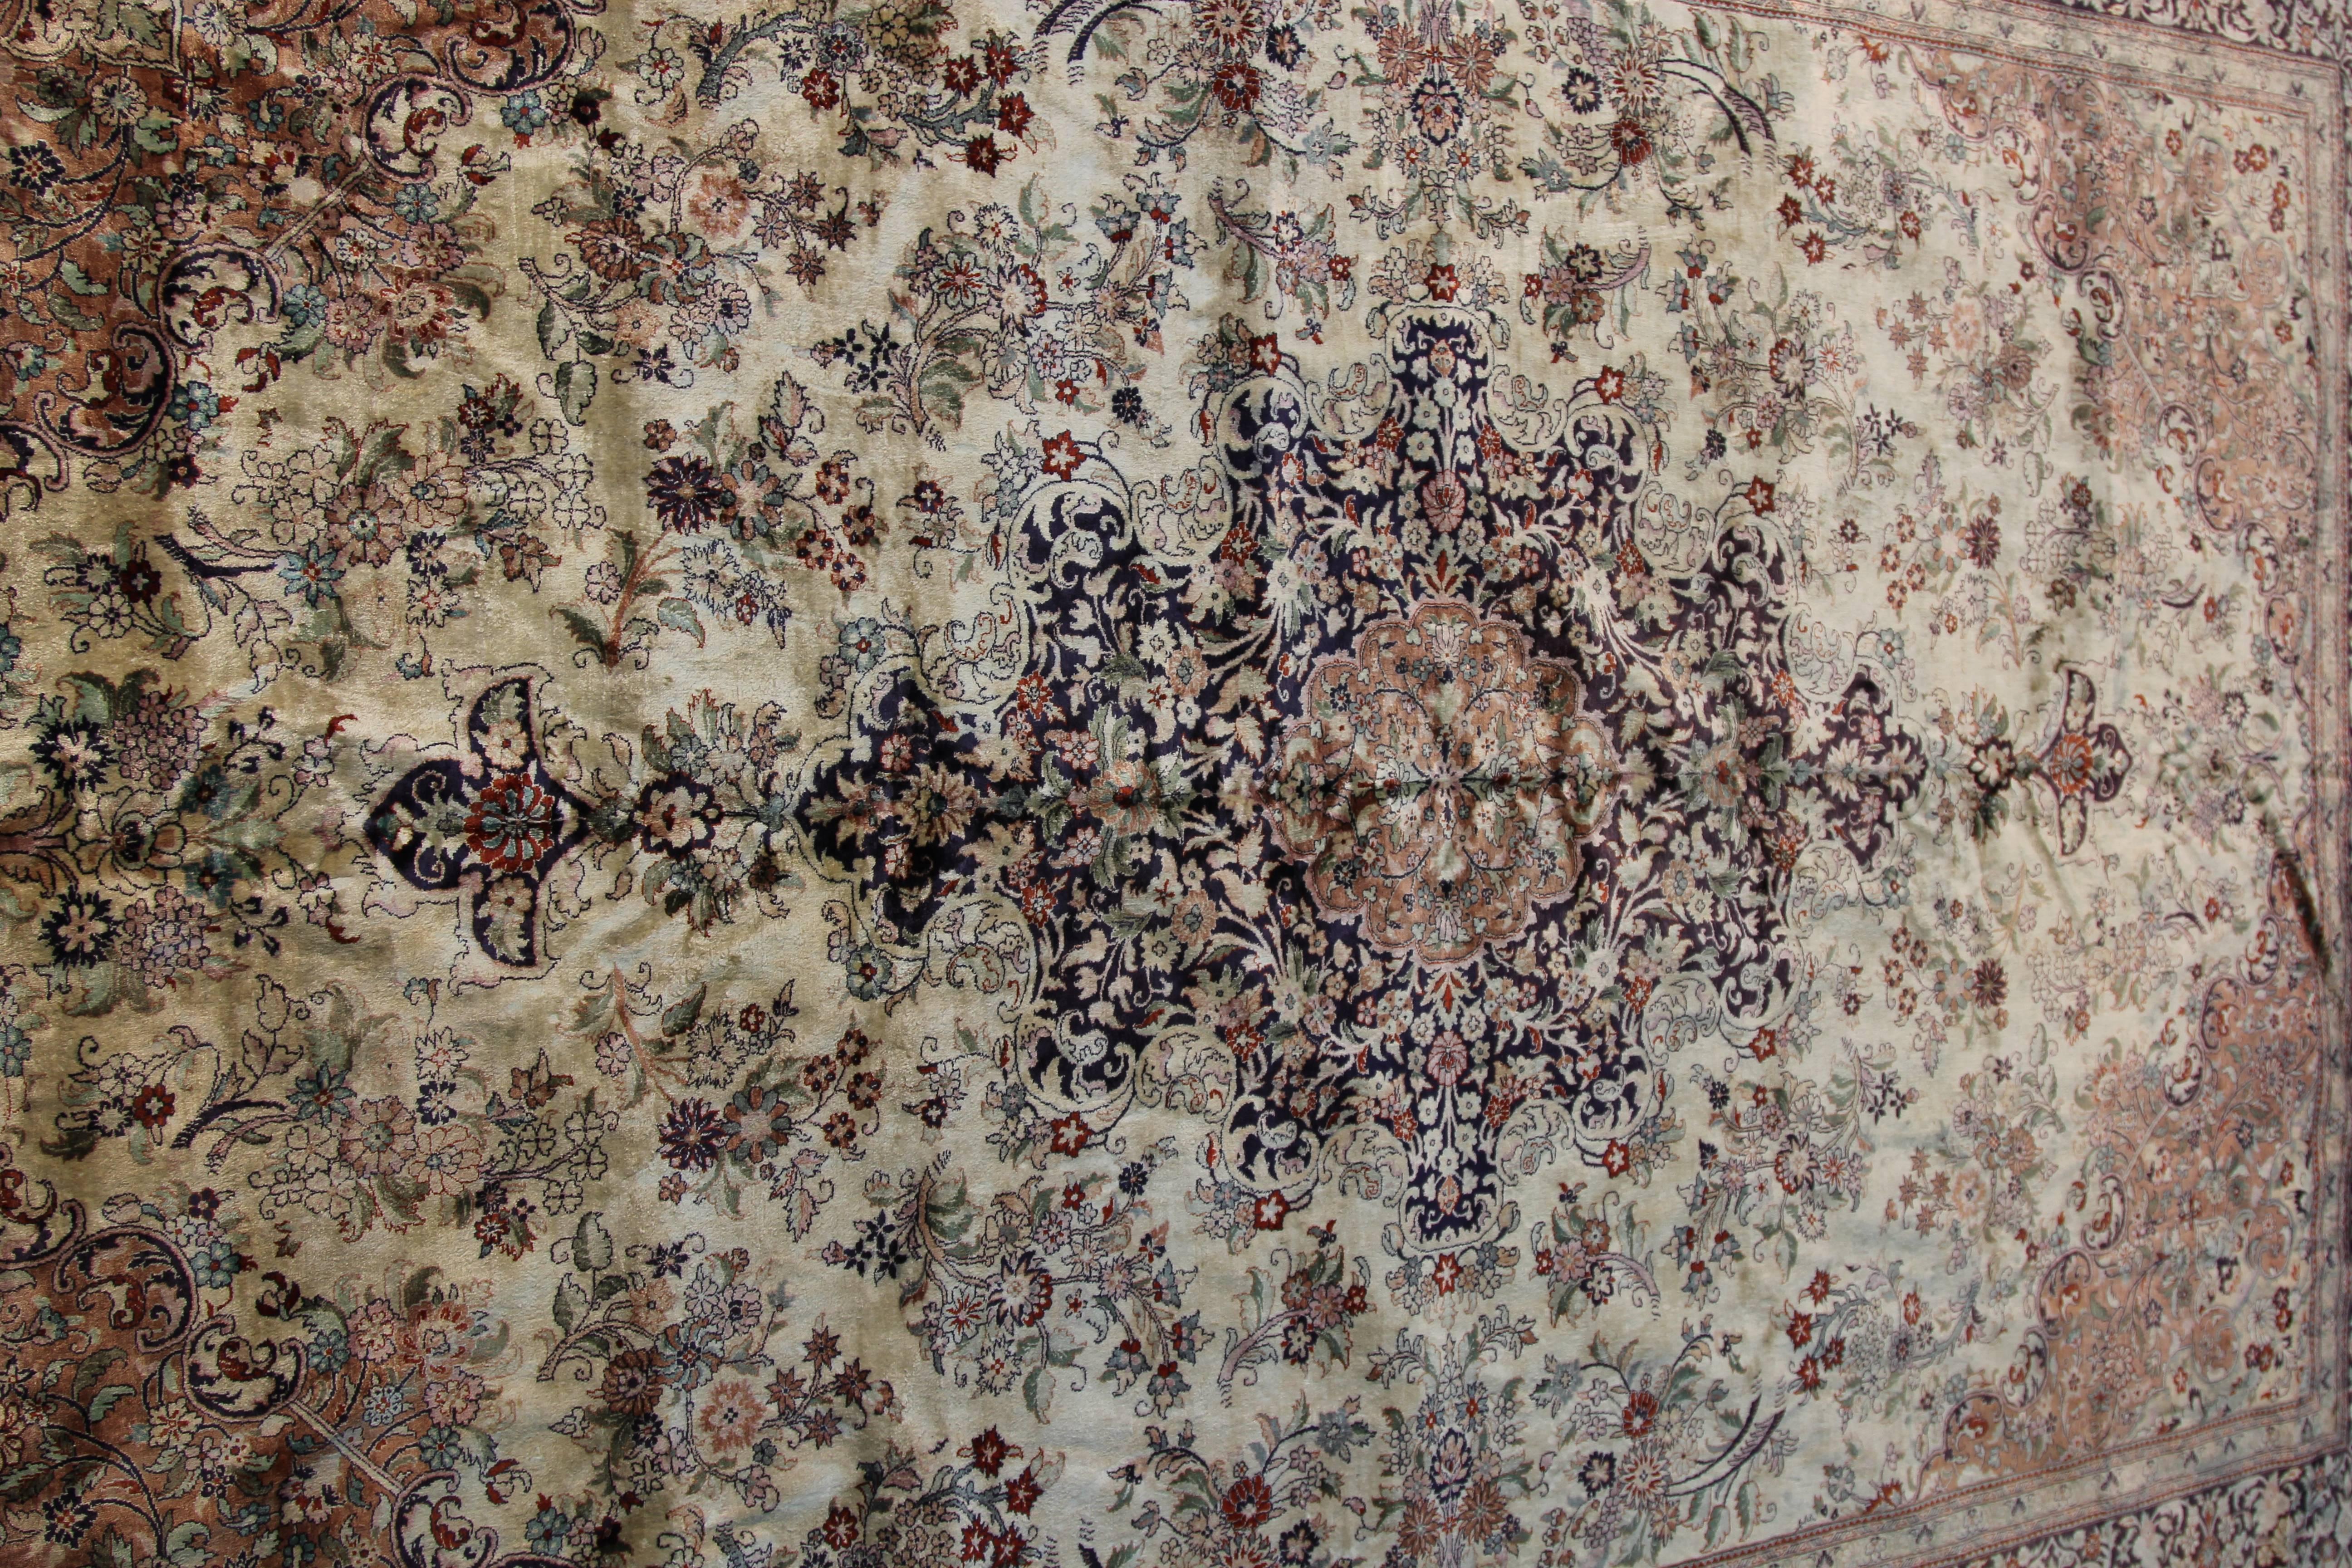 A rare vintage oriental silk rug. All handmade in pastel and cream colors. Extremely tight weave pattern and workmanship indicative of a master rug weaver.

The rug was never used or walked on, having always been in the collection of a textile